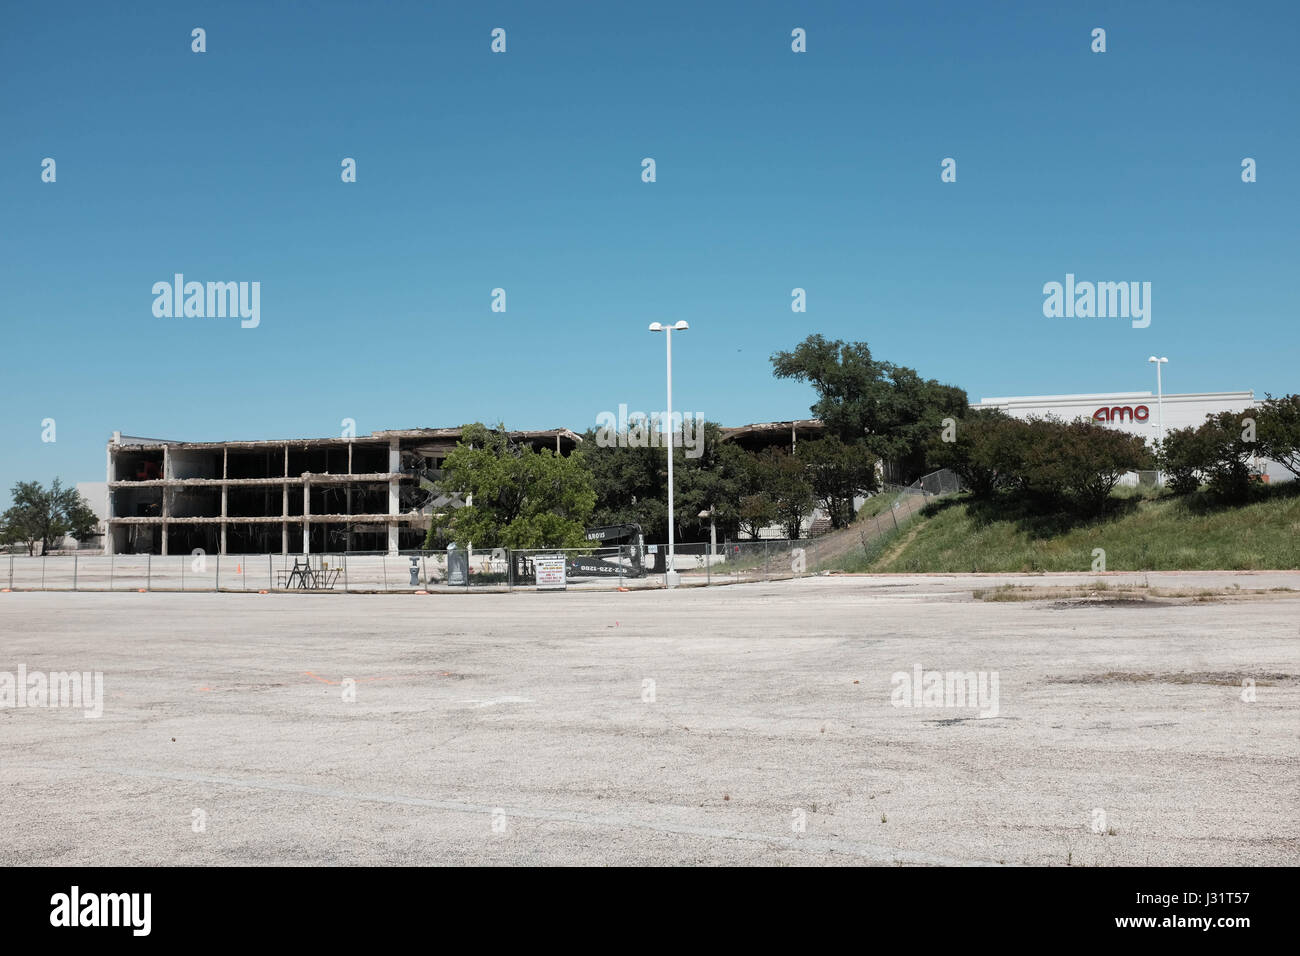 Dallas, Texas USA. 1st May,  2017. Once busy Valley View Mall in North Dallas is shutting down a piece at a time to make room for a new development called 'Midtown'. On the left, the west face of the mall is exposed. On the right, the AMC theater is open for business. credit: Keith Adamek/Alamy Live News Stock Photo